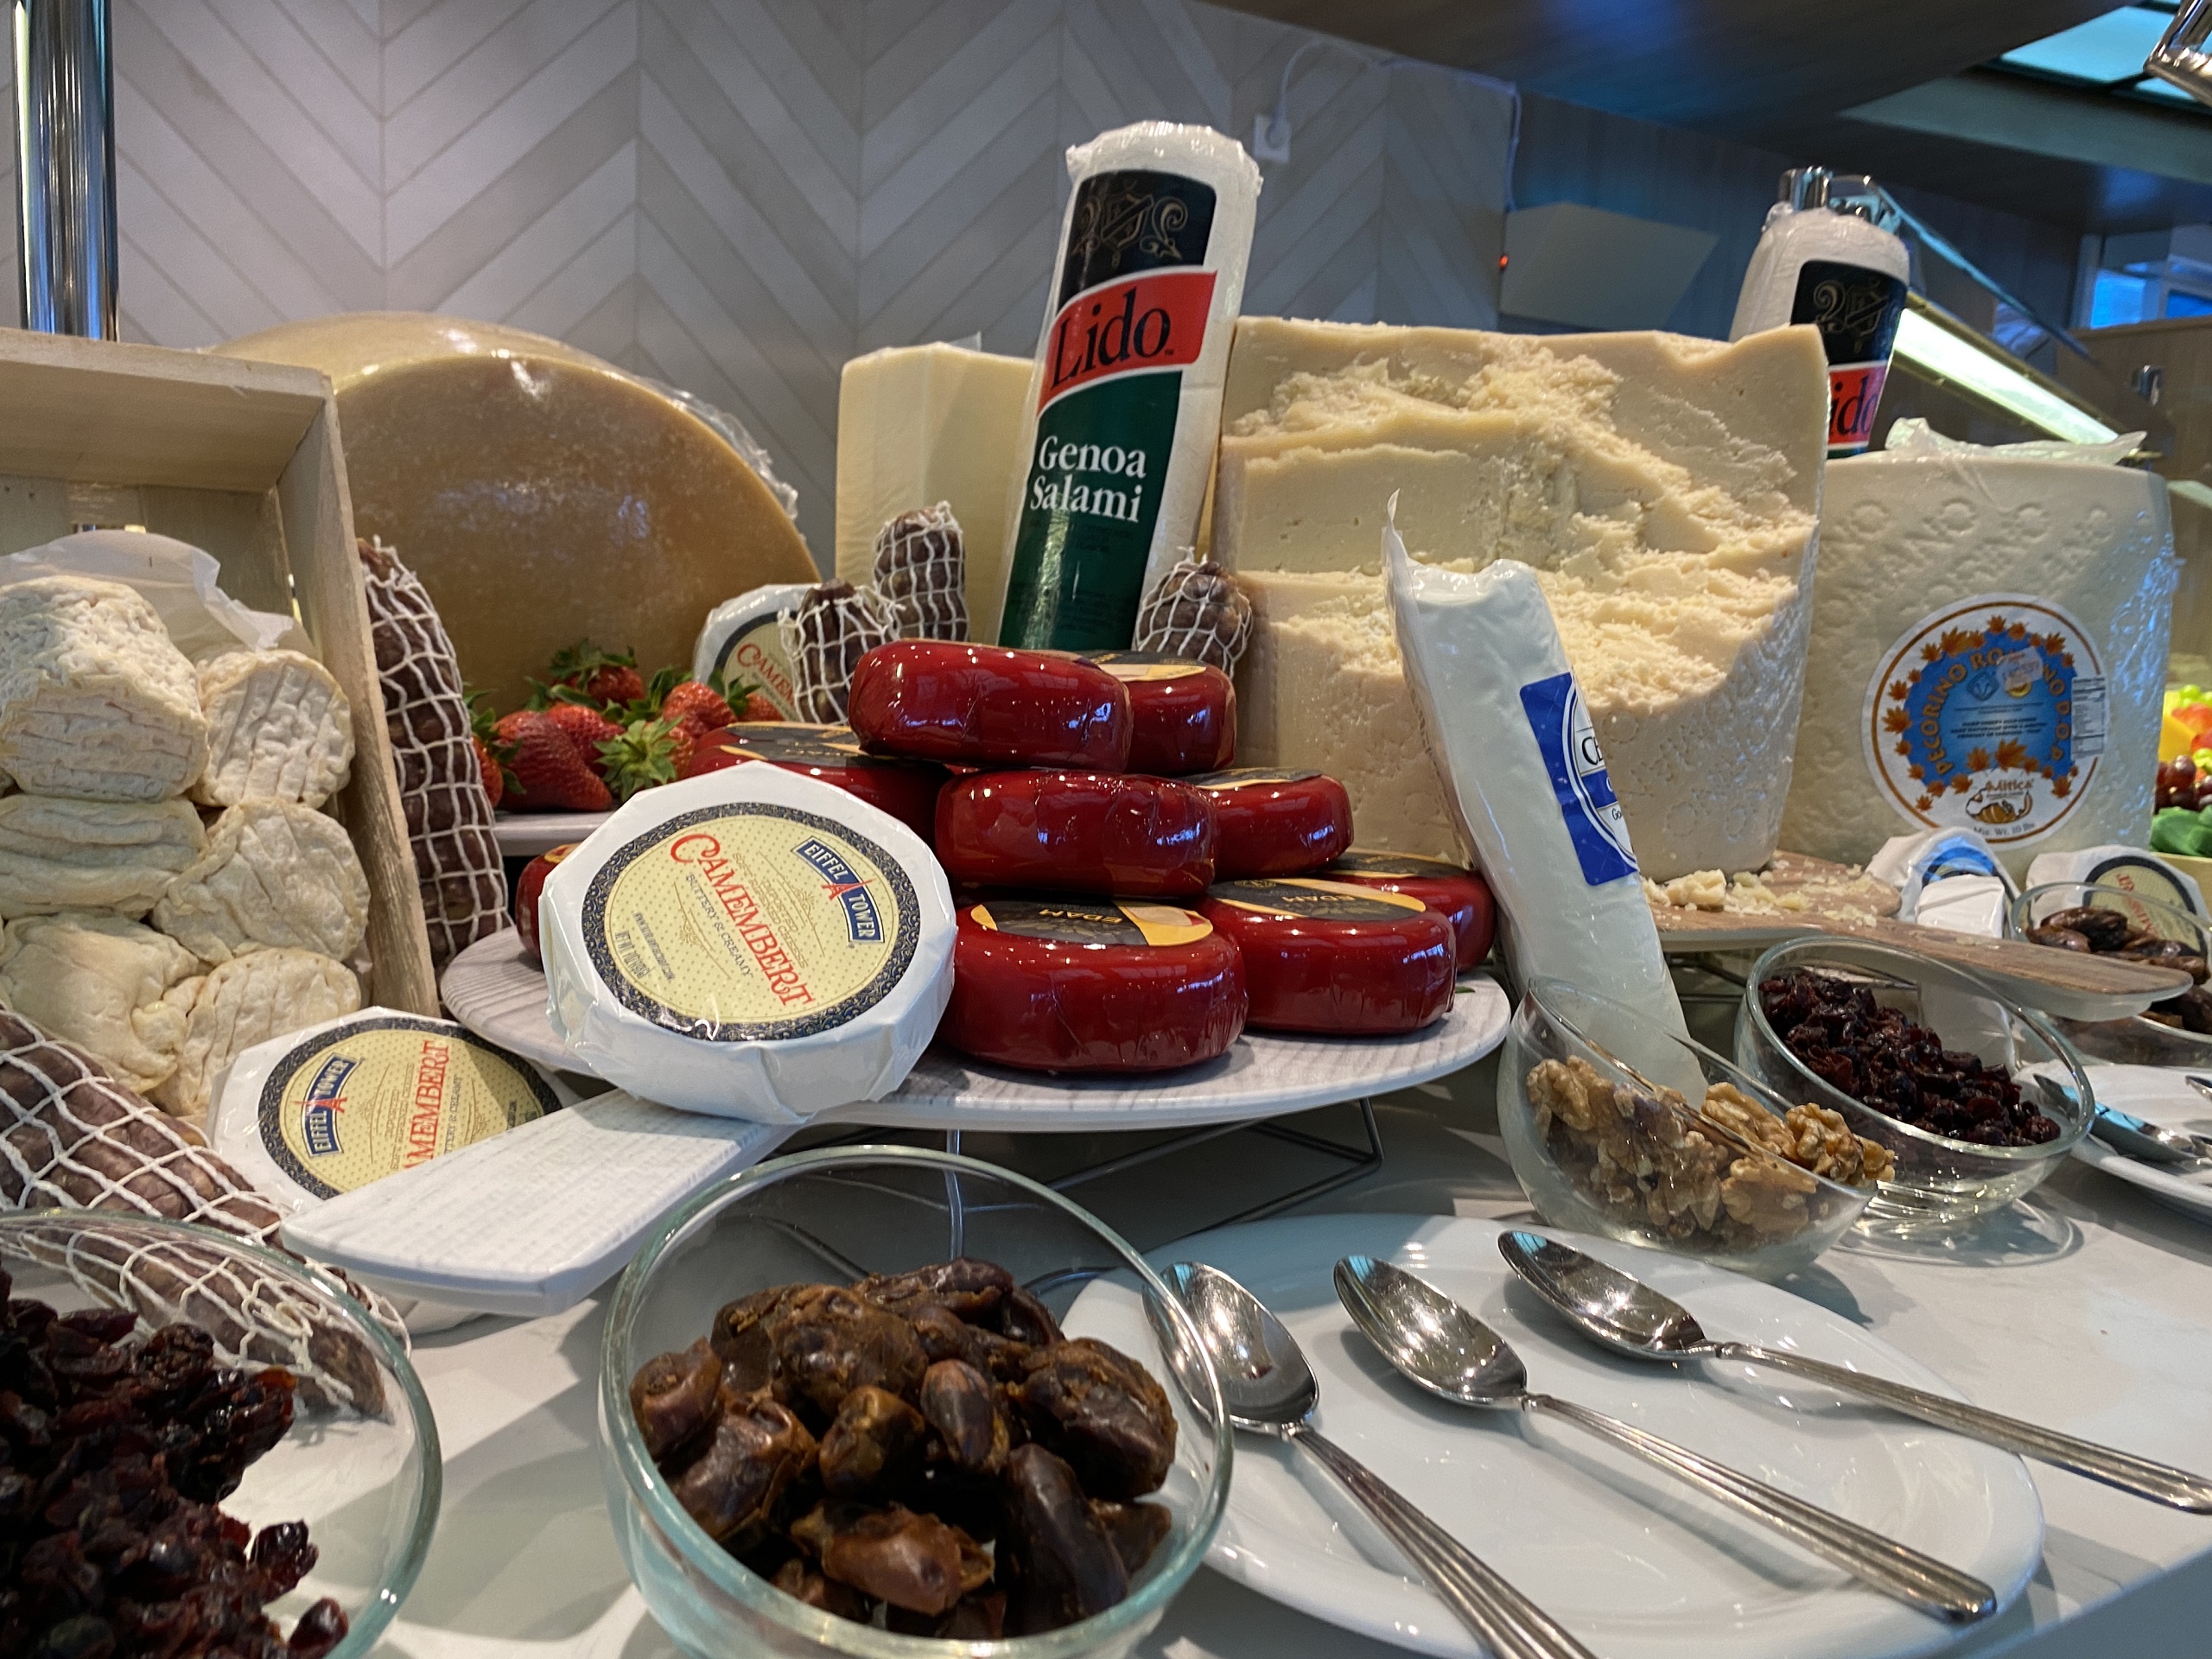 A cheese display waits for passengers in the buffet on Celebrity Millennium.